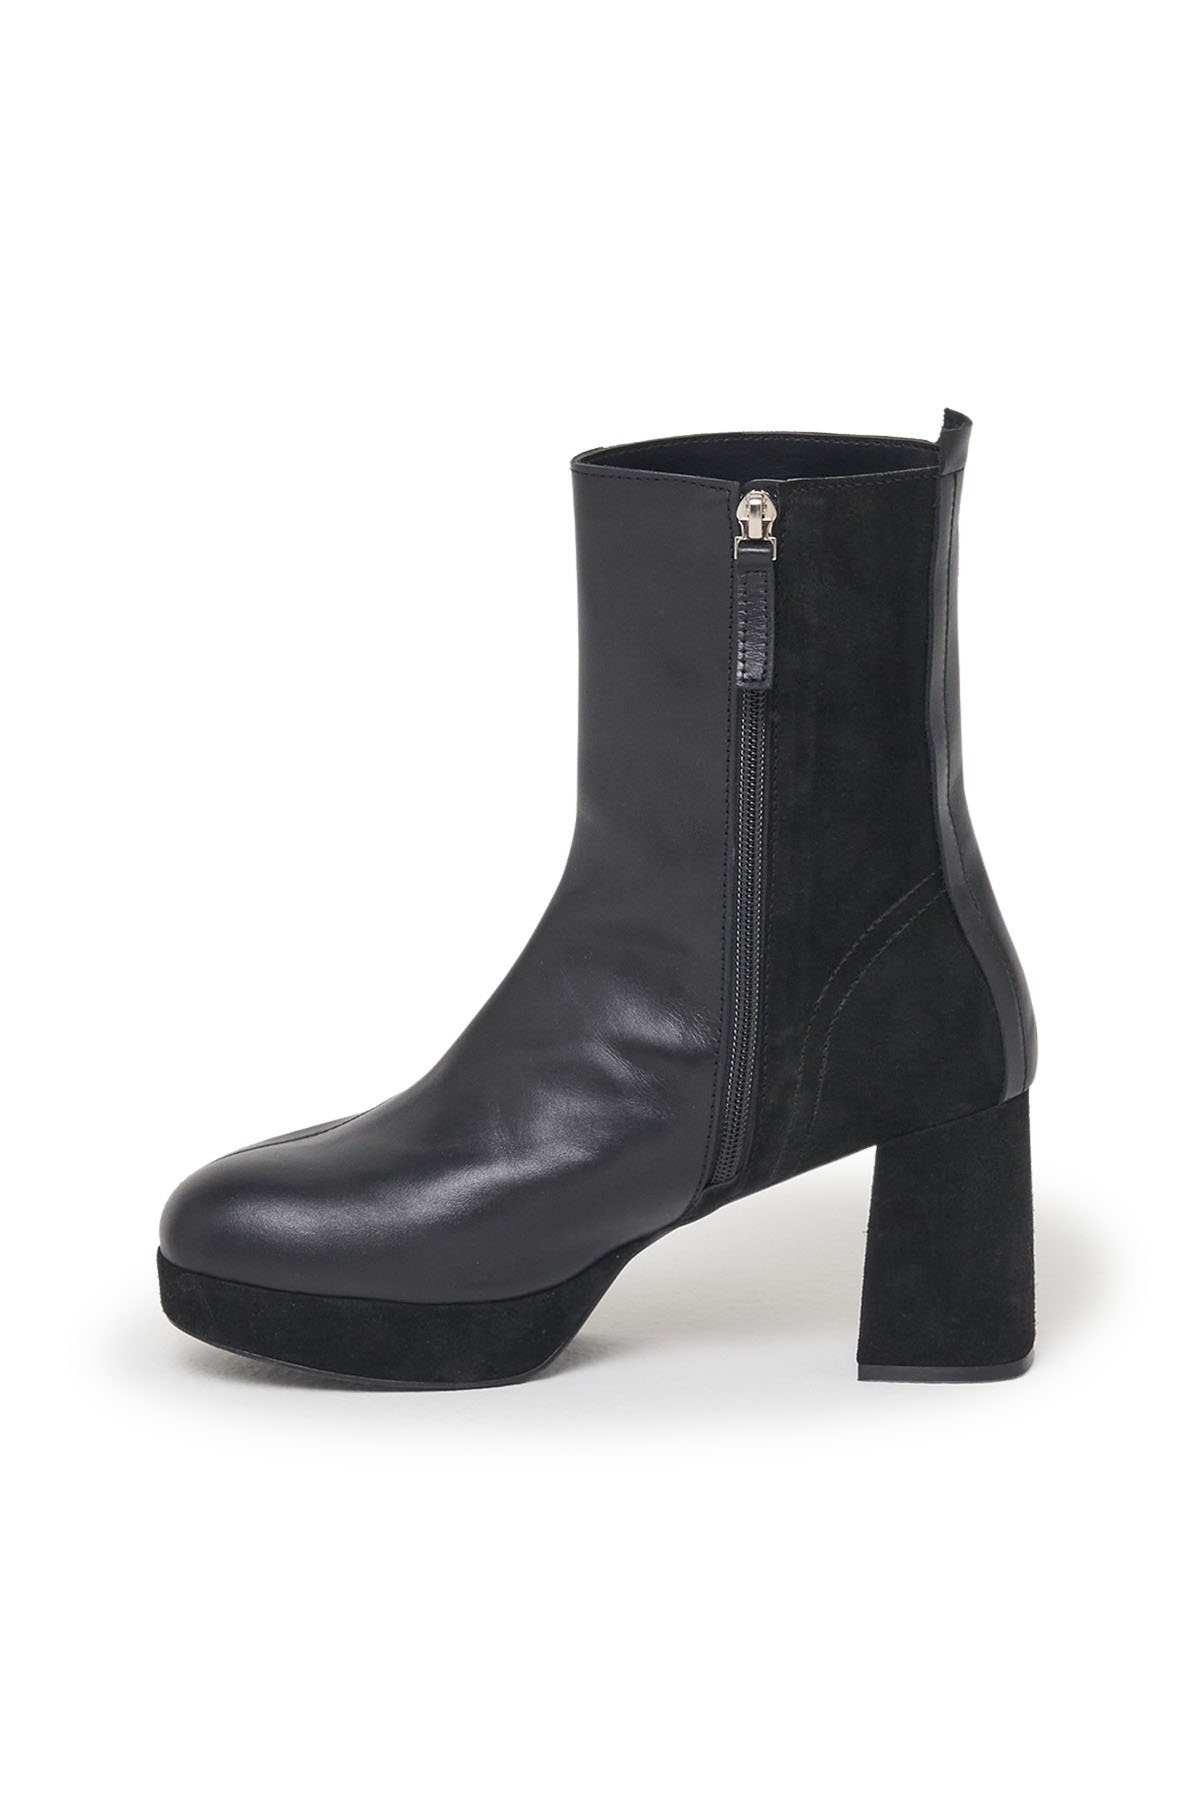 ROUND ANKLE BOOTS IN BLACK